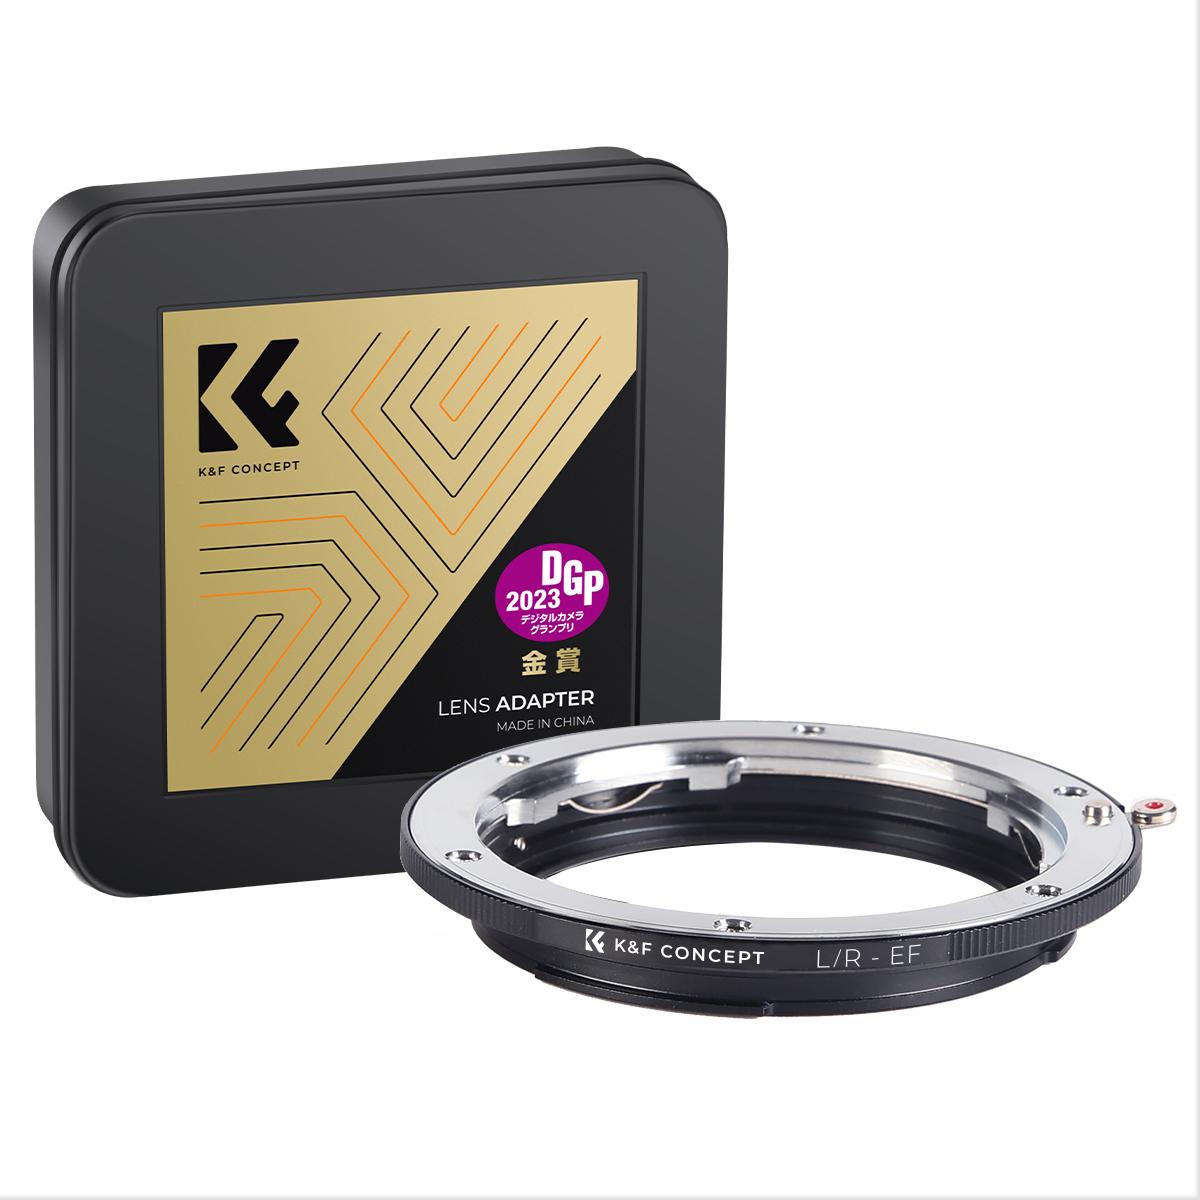 Leica R Lenses to Canon EF Lens Mount Adapter K&F Concept M40131 Lens Adapter